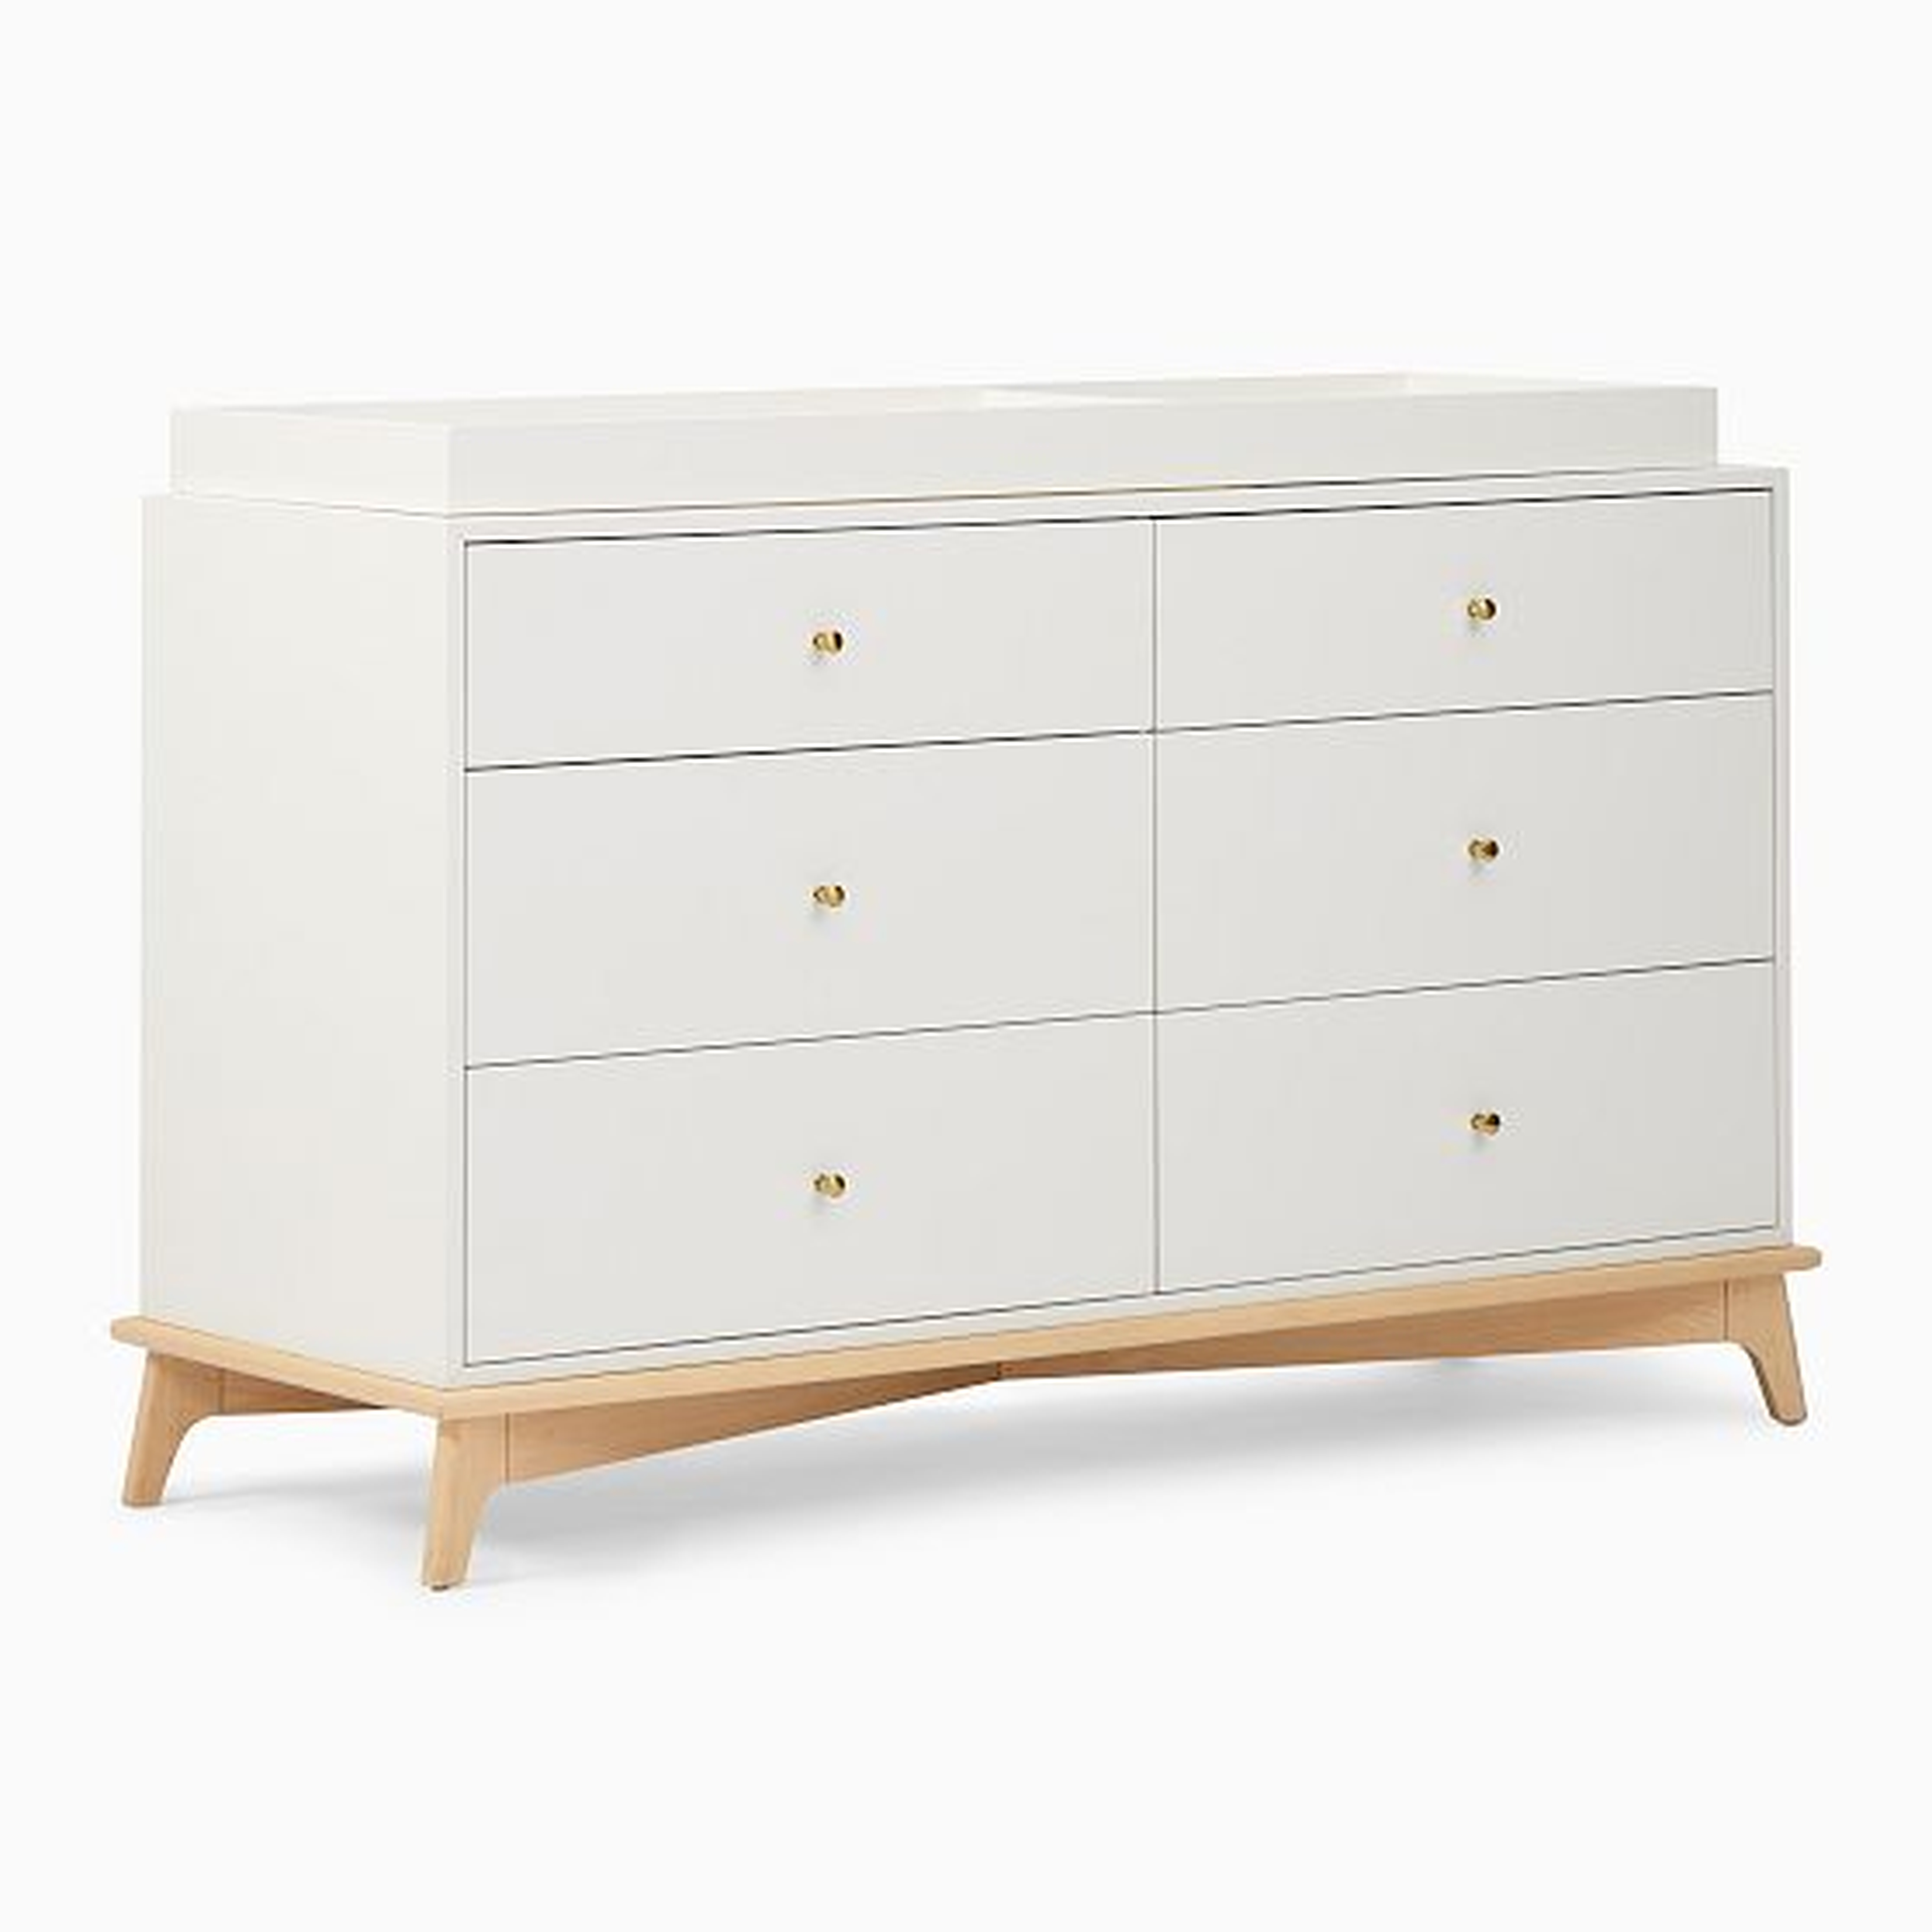 Sydney 6 Drawer Changing Table Pack, Simply White/Natural - West Elm